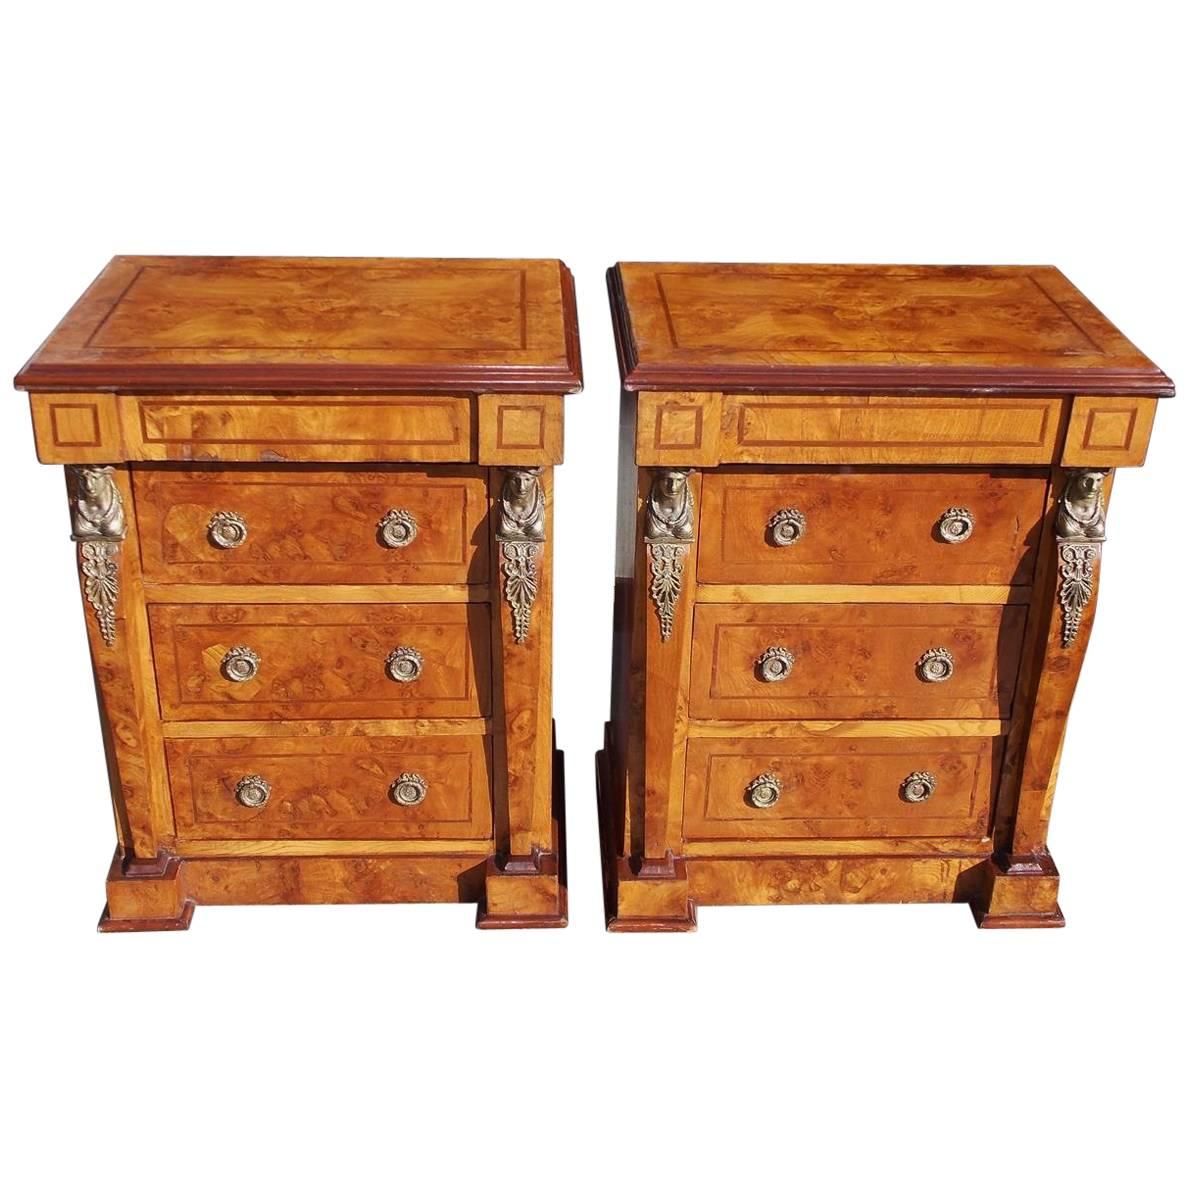 Pair of English Neoclassical Style Burl Walnut Figural Ormolu Commodes. C. 1880 For Sale